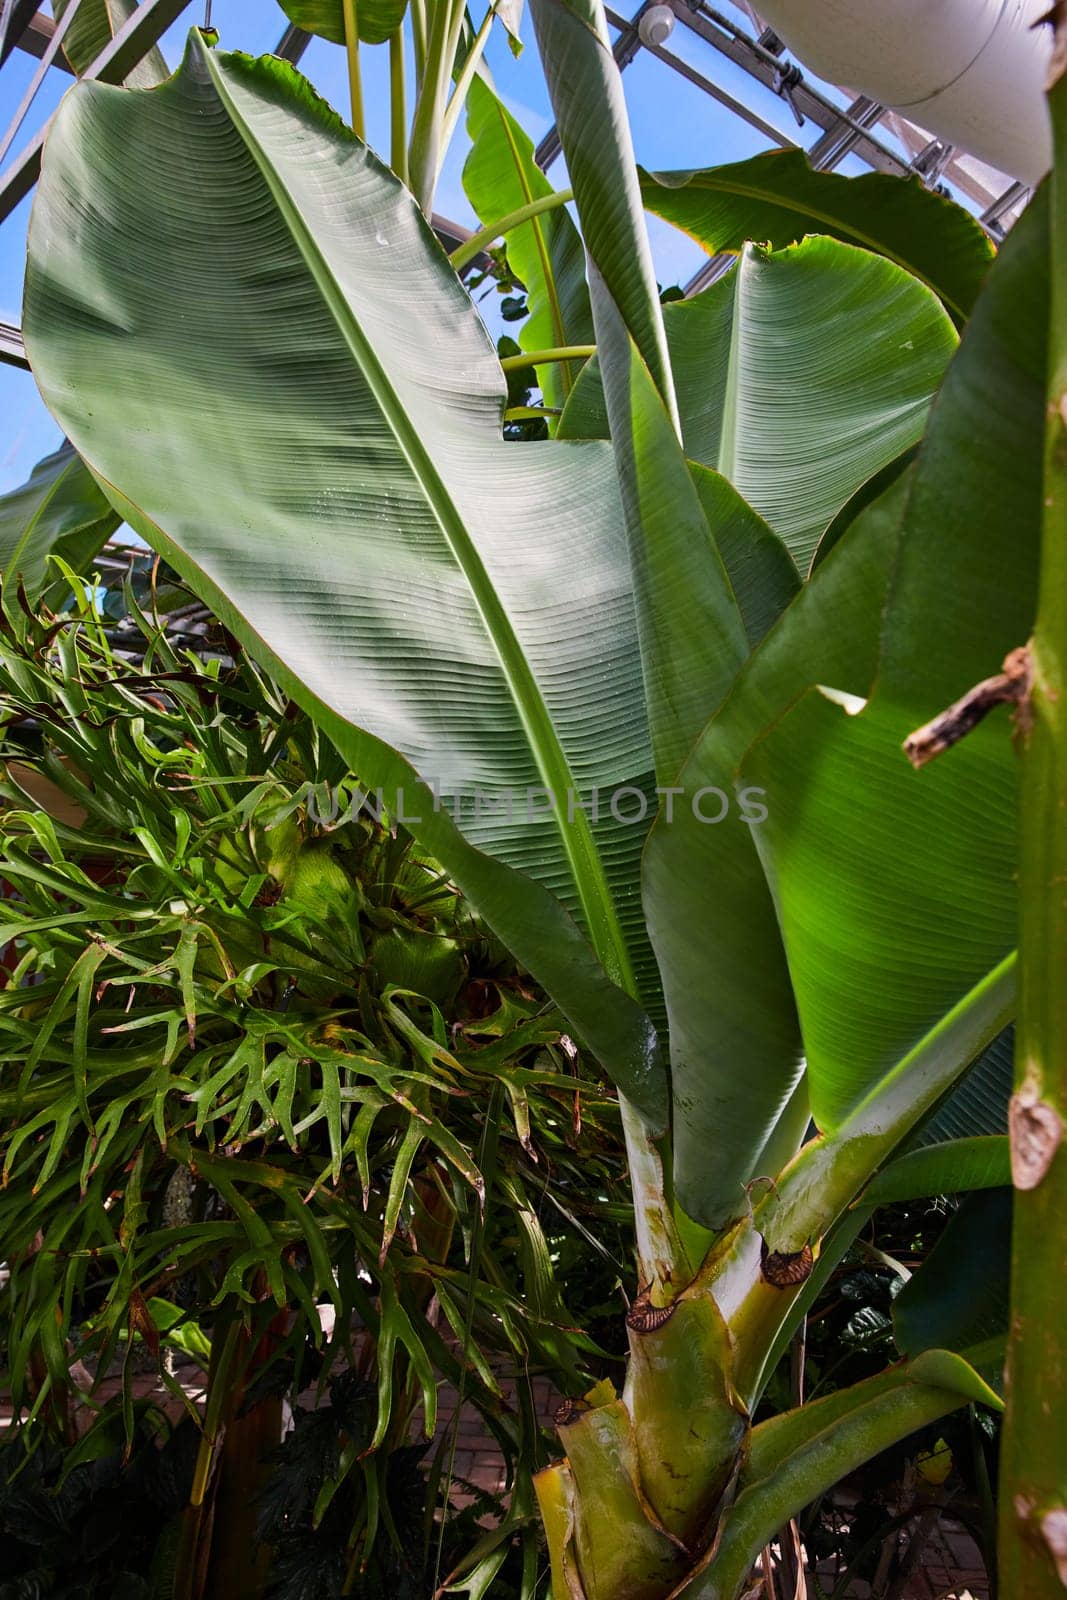 Lush Green Banana Leaves with Blue Sky, Low Angle View by njproductions